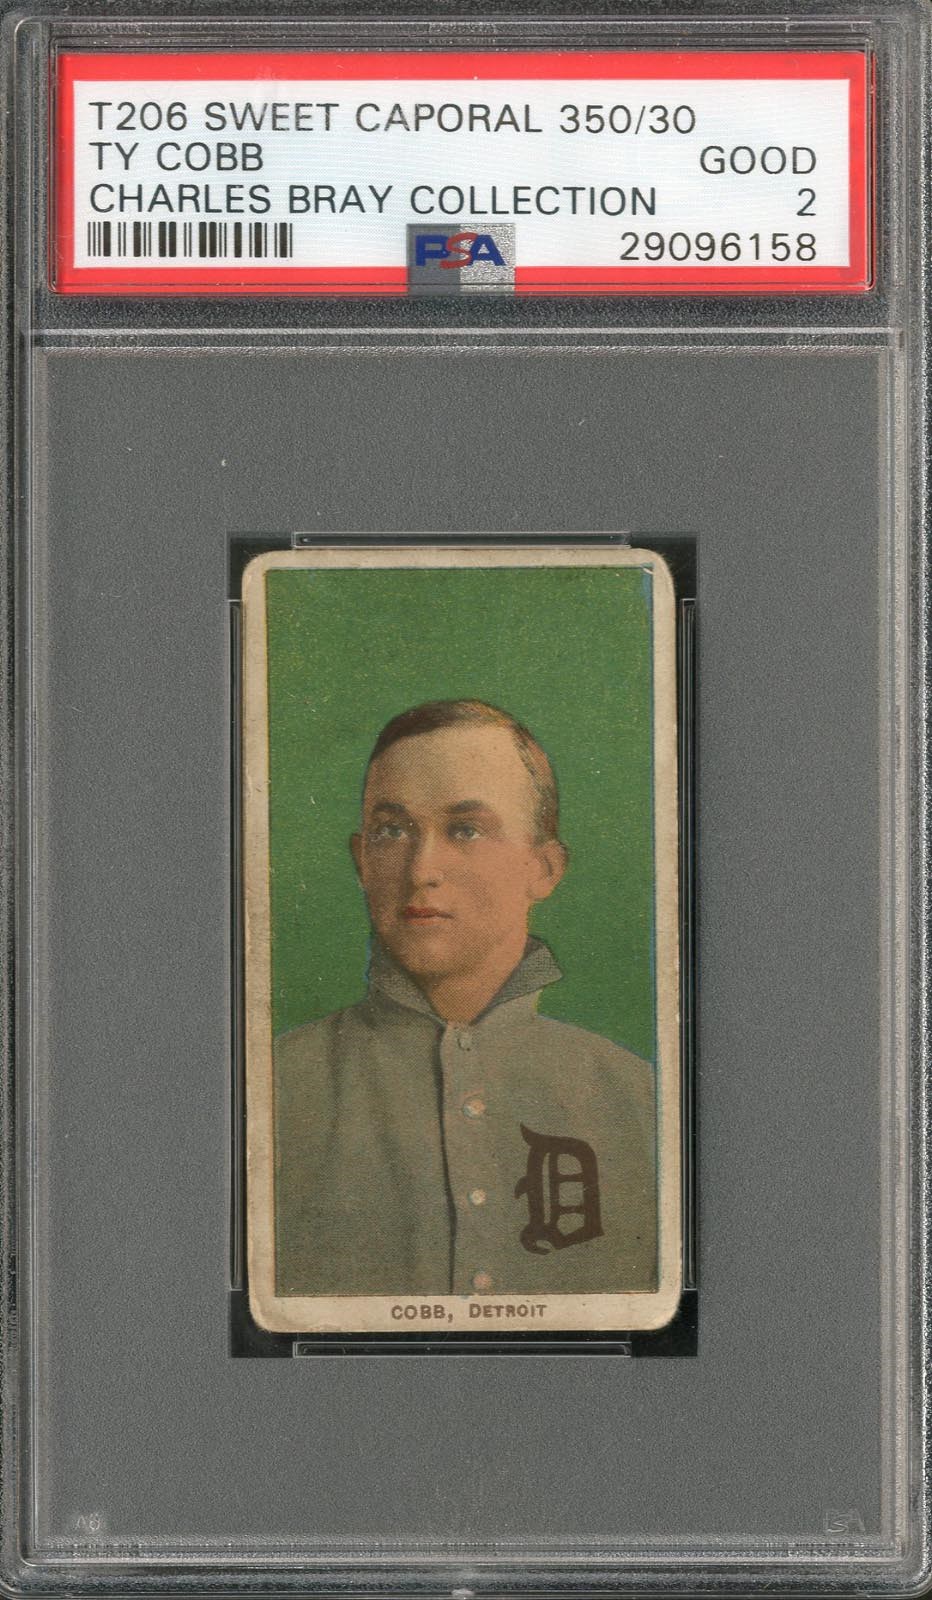 Best of the Best - T206 TY Cobb Sweet Caporal 350/30 Green Portrait PSA 2 From The Charles Bray Collection